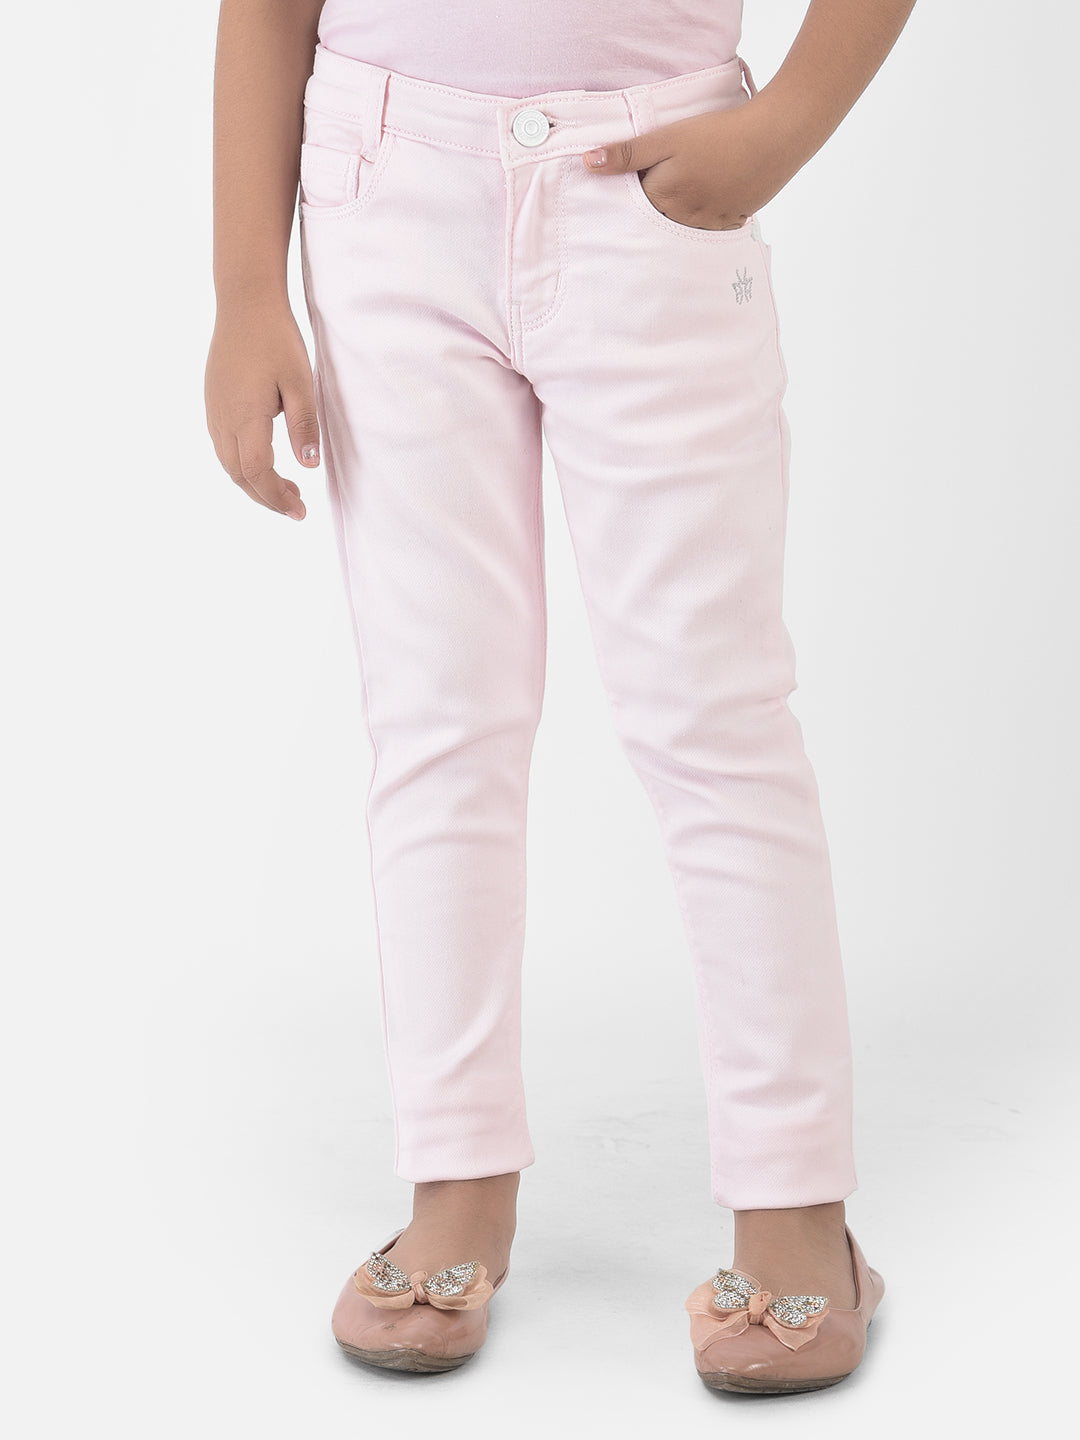 Baby Pink Jeans - Girls Jeans